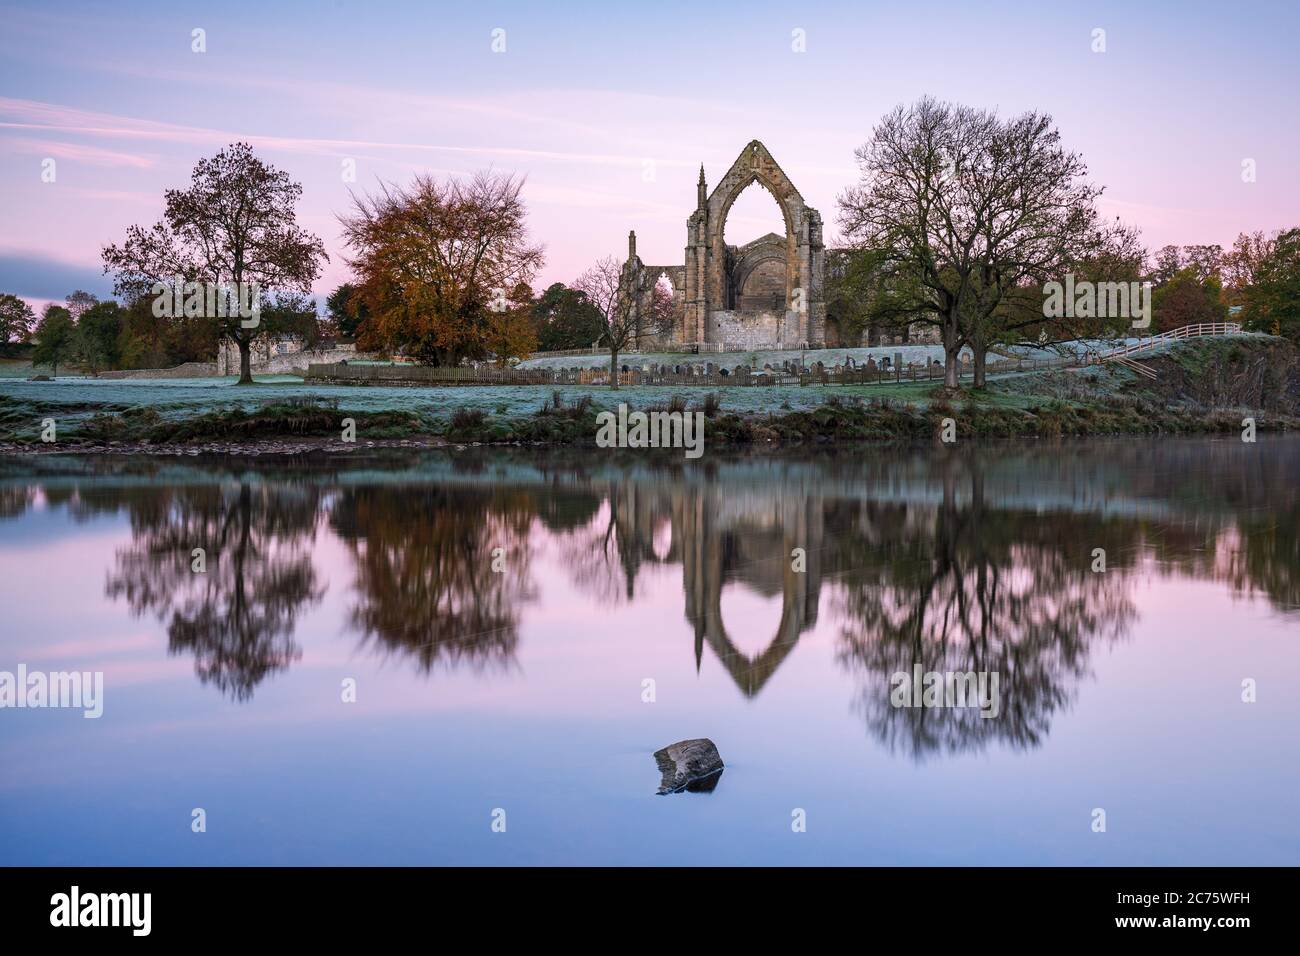 The ruins of Bolton Abbey in Wharfedale, Yorkshire, are reflected in the River Wharfe on a beautifully calm, frosty autumn morning. Stock Photo